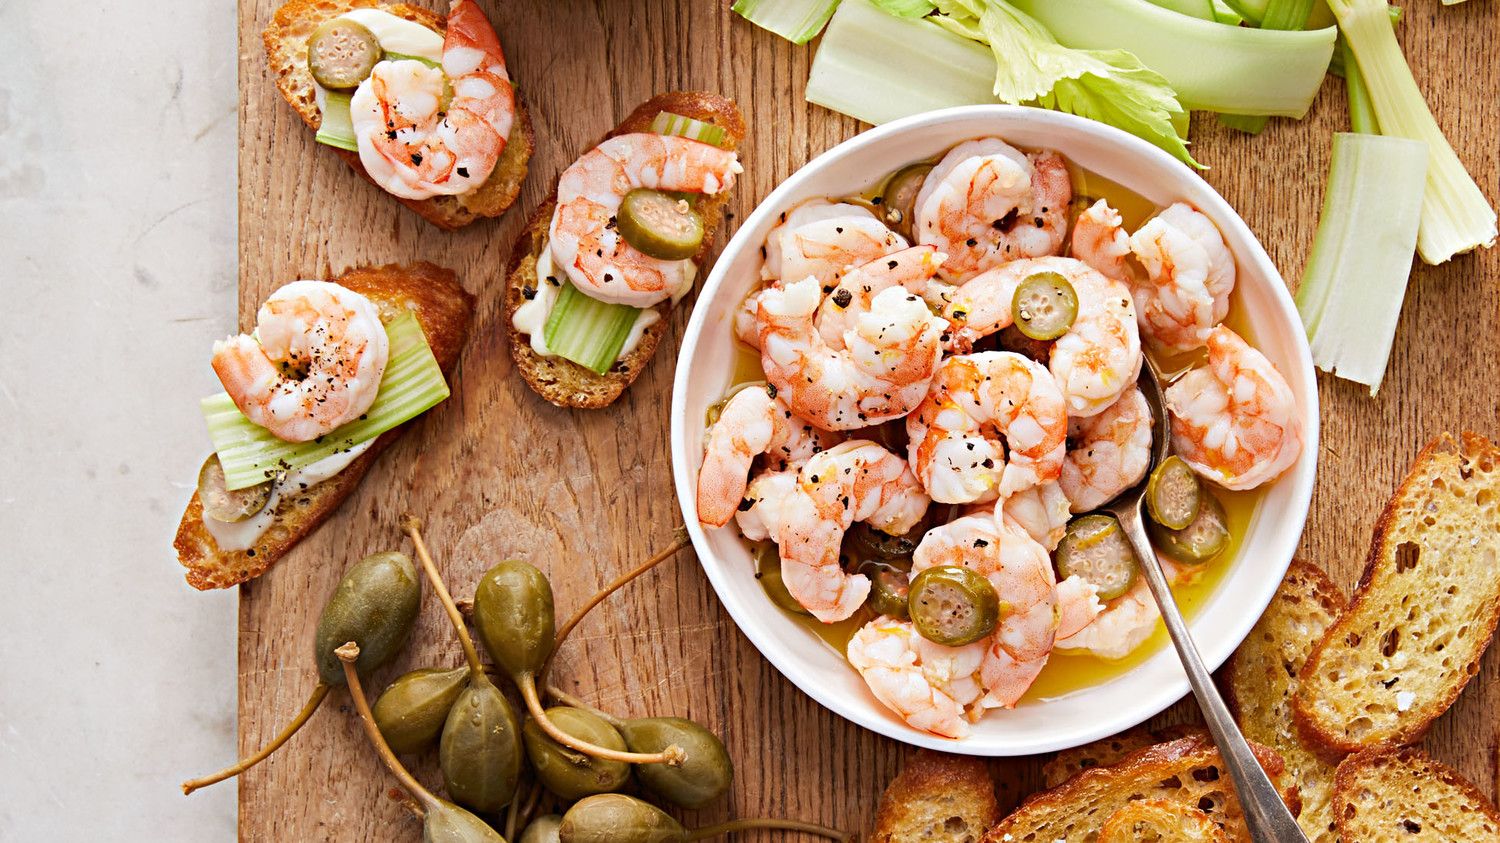 Can We Guess Your Age by Your Taste in Appetizers? Seafood appetizers